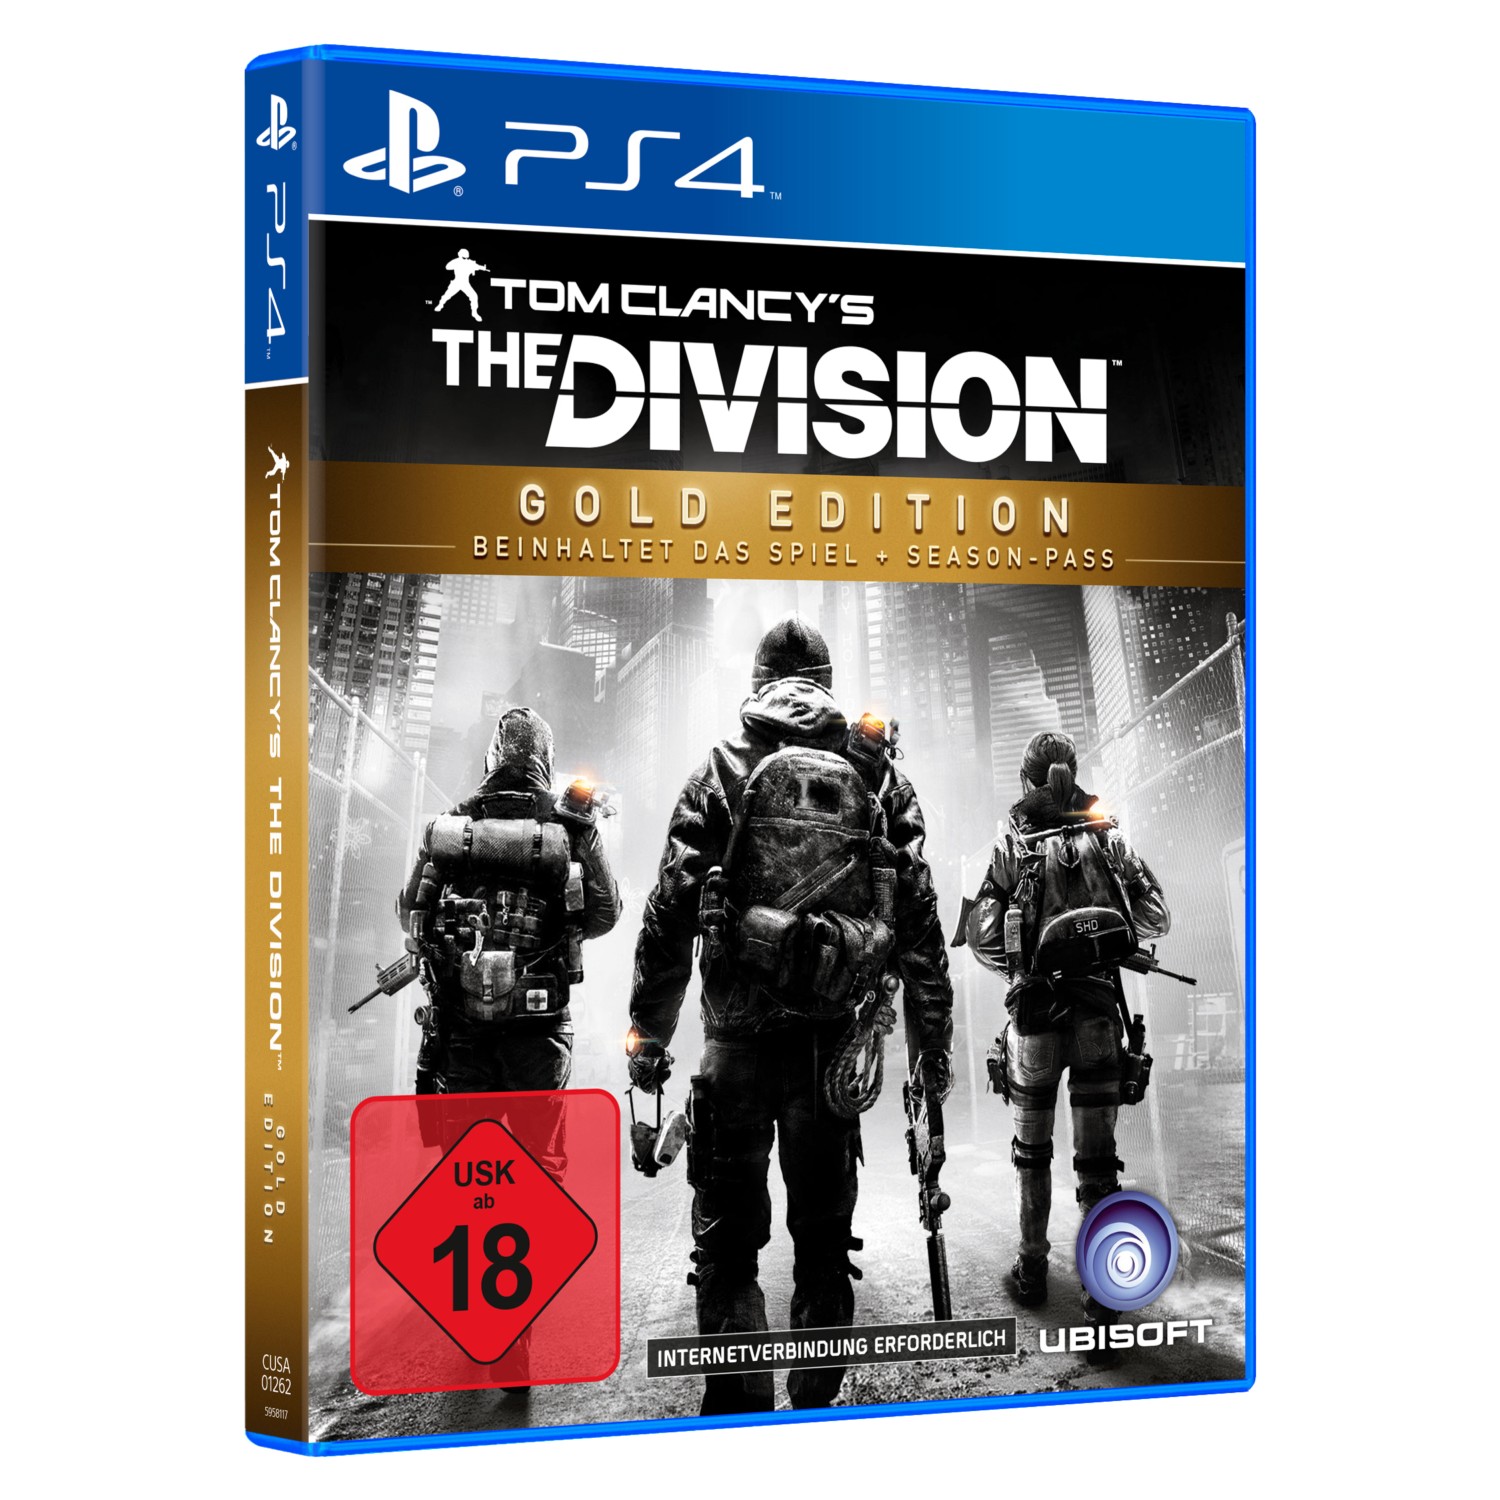 The division ps4. Дивижон 2 ПС 4. Tom Clancy's ps4. Том Клэнси ps4. Tom Clancy the Division ПС 4 диск.